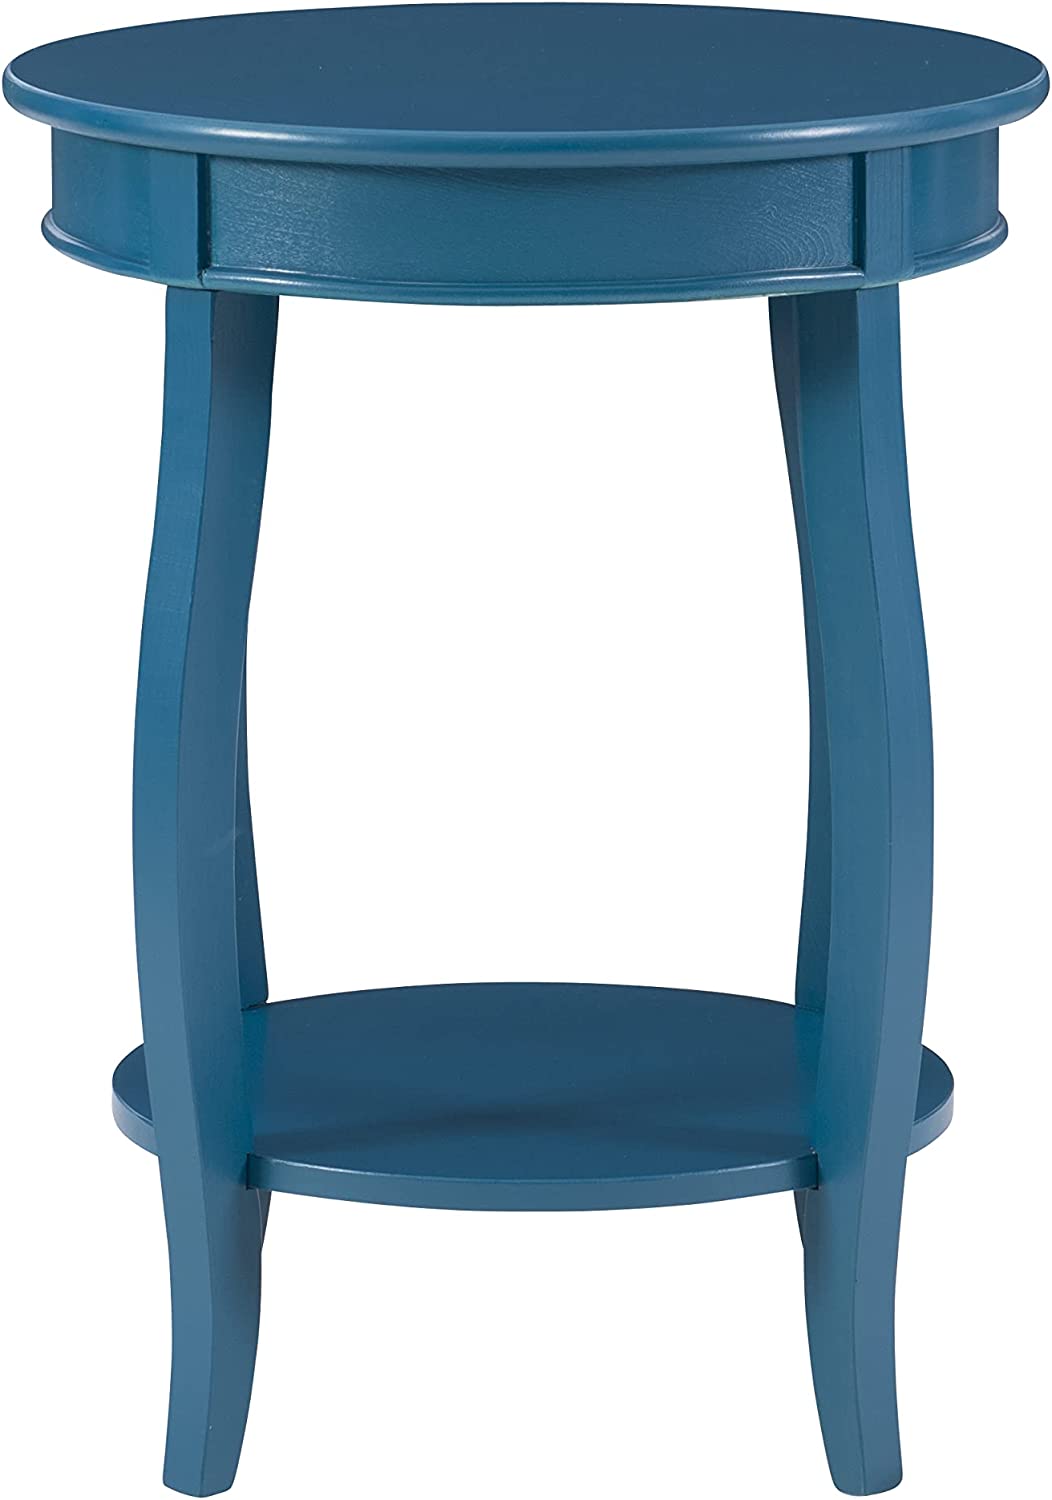 Powell Furniture Powell Teal Round Shelf Table